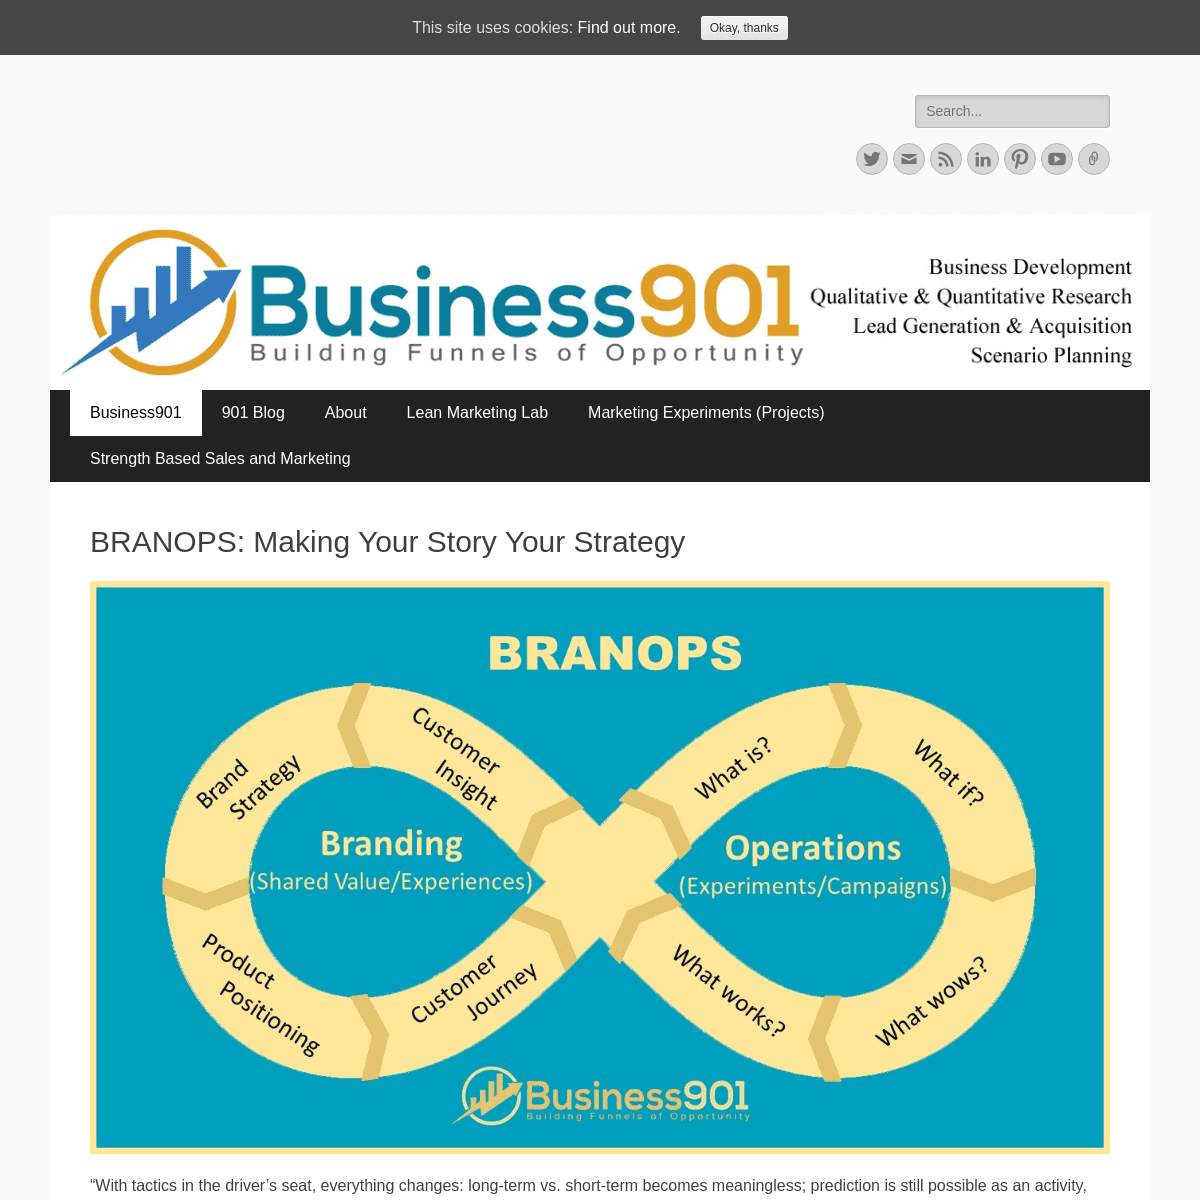 A complete backup of business901.com